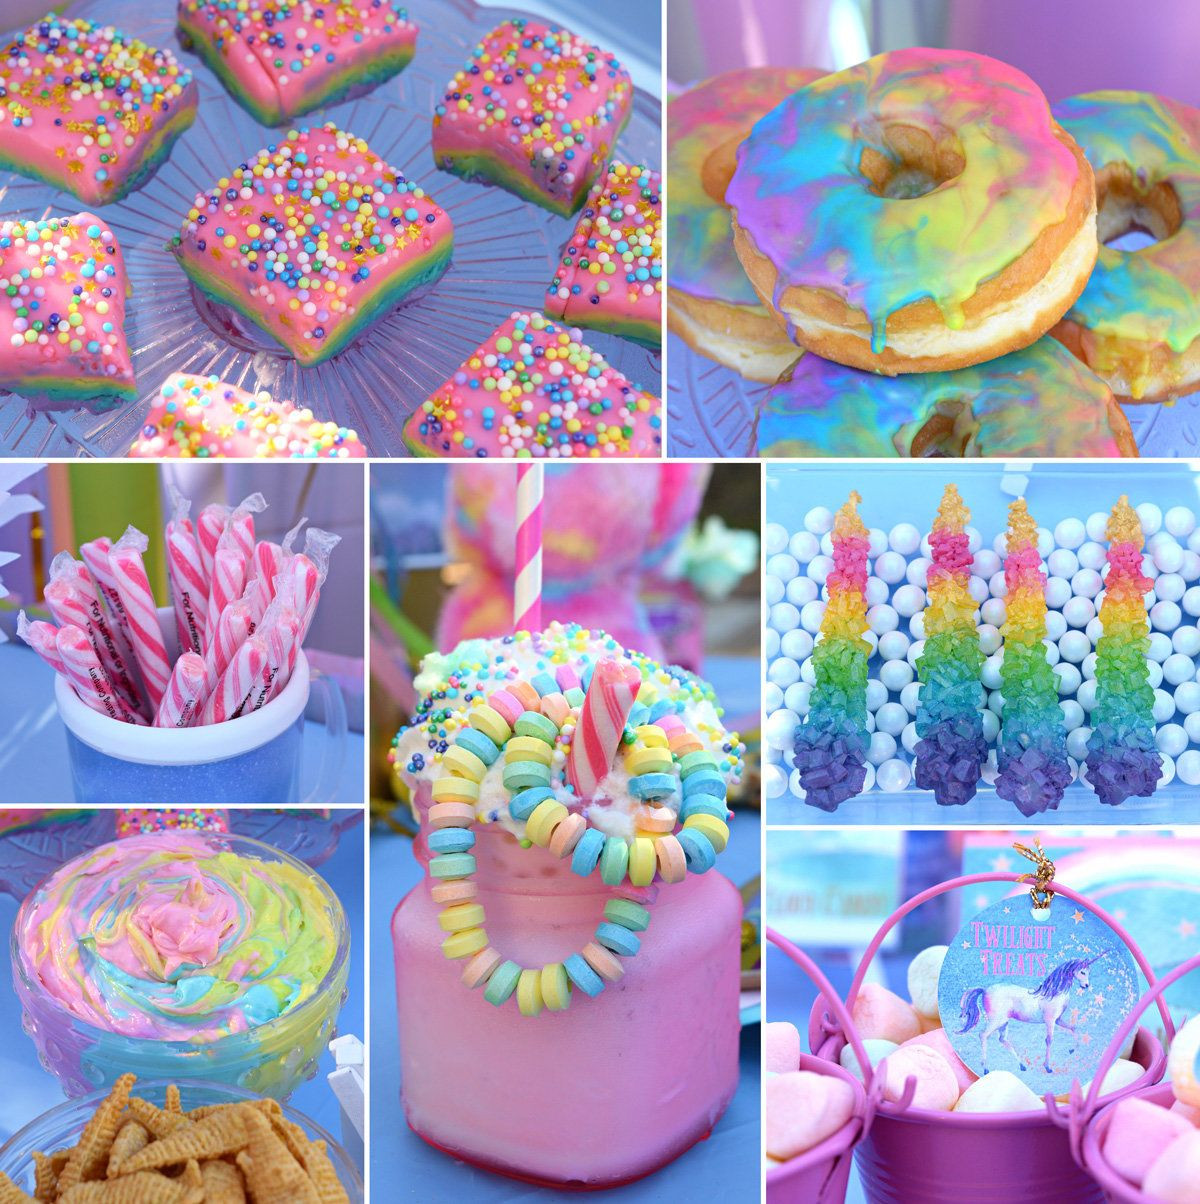 Unicorn Party Food Ideas Ponytails
 Unicorn food Party Ideas in 2019